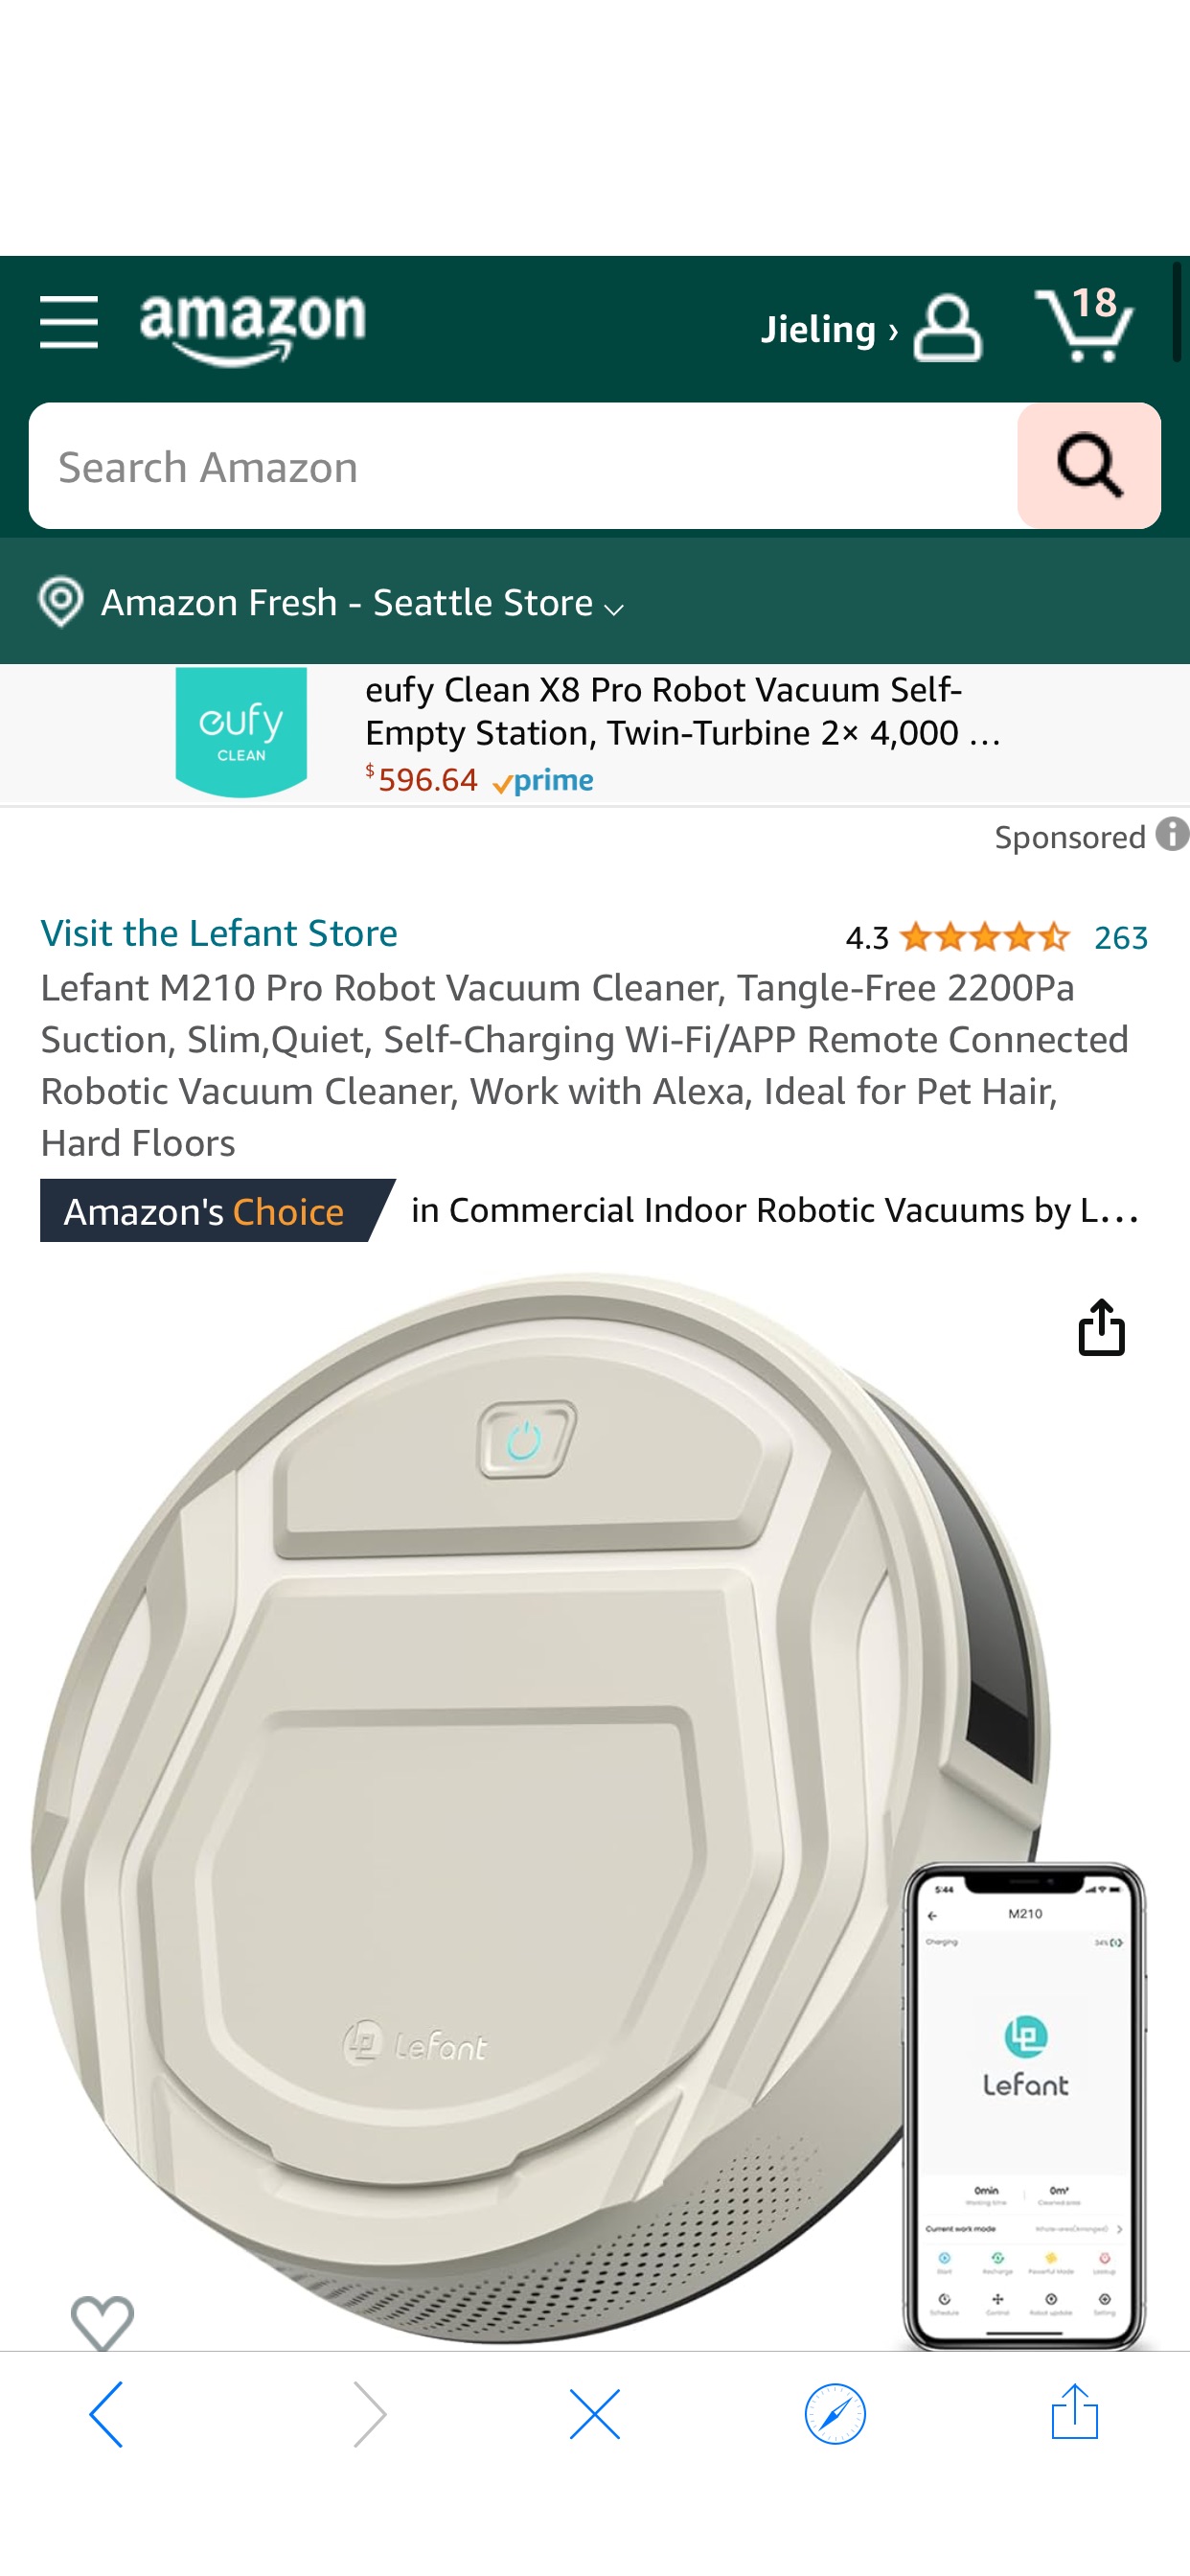 Amazon.com: Lefant M210 Pro Robot Vacuum Cleaner, Tangle-Free 2200Pa Suction, Slim,Quiet, Self-Charging Wi-Fi/APP Remote Connected Robotic Vacuum Cleaner, Work with Alexa, Ideal for Pet Hair, Hard Flo